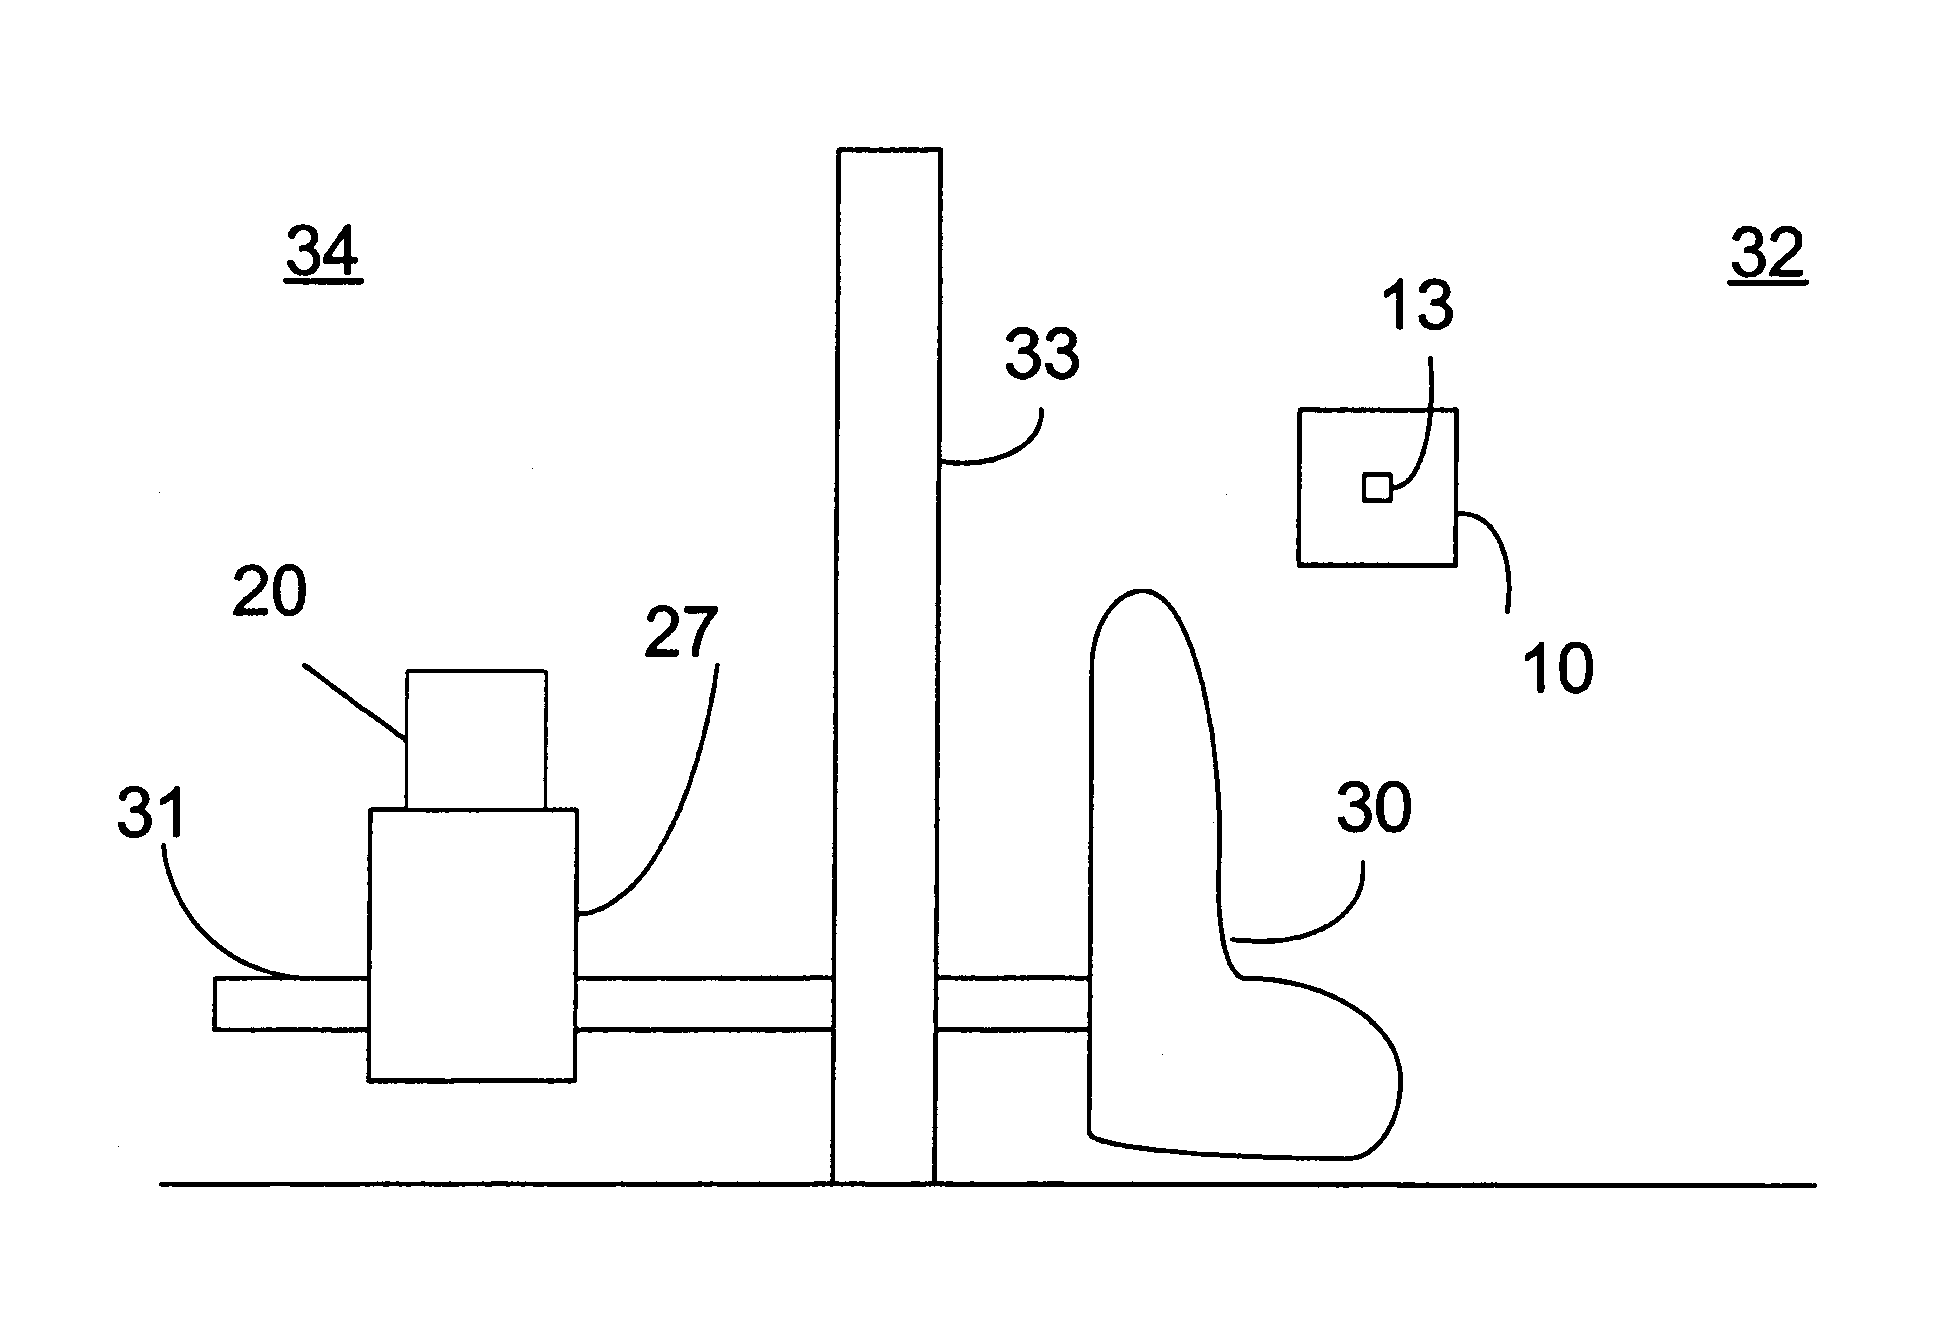 System and method for improved installation and control of concealed plumbing flush valves